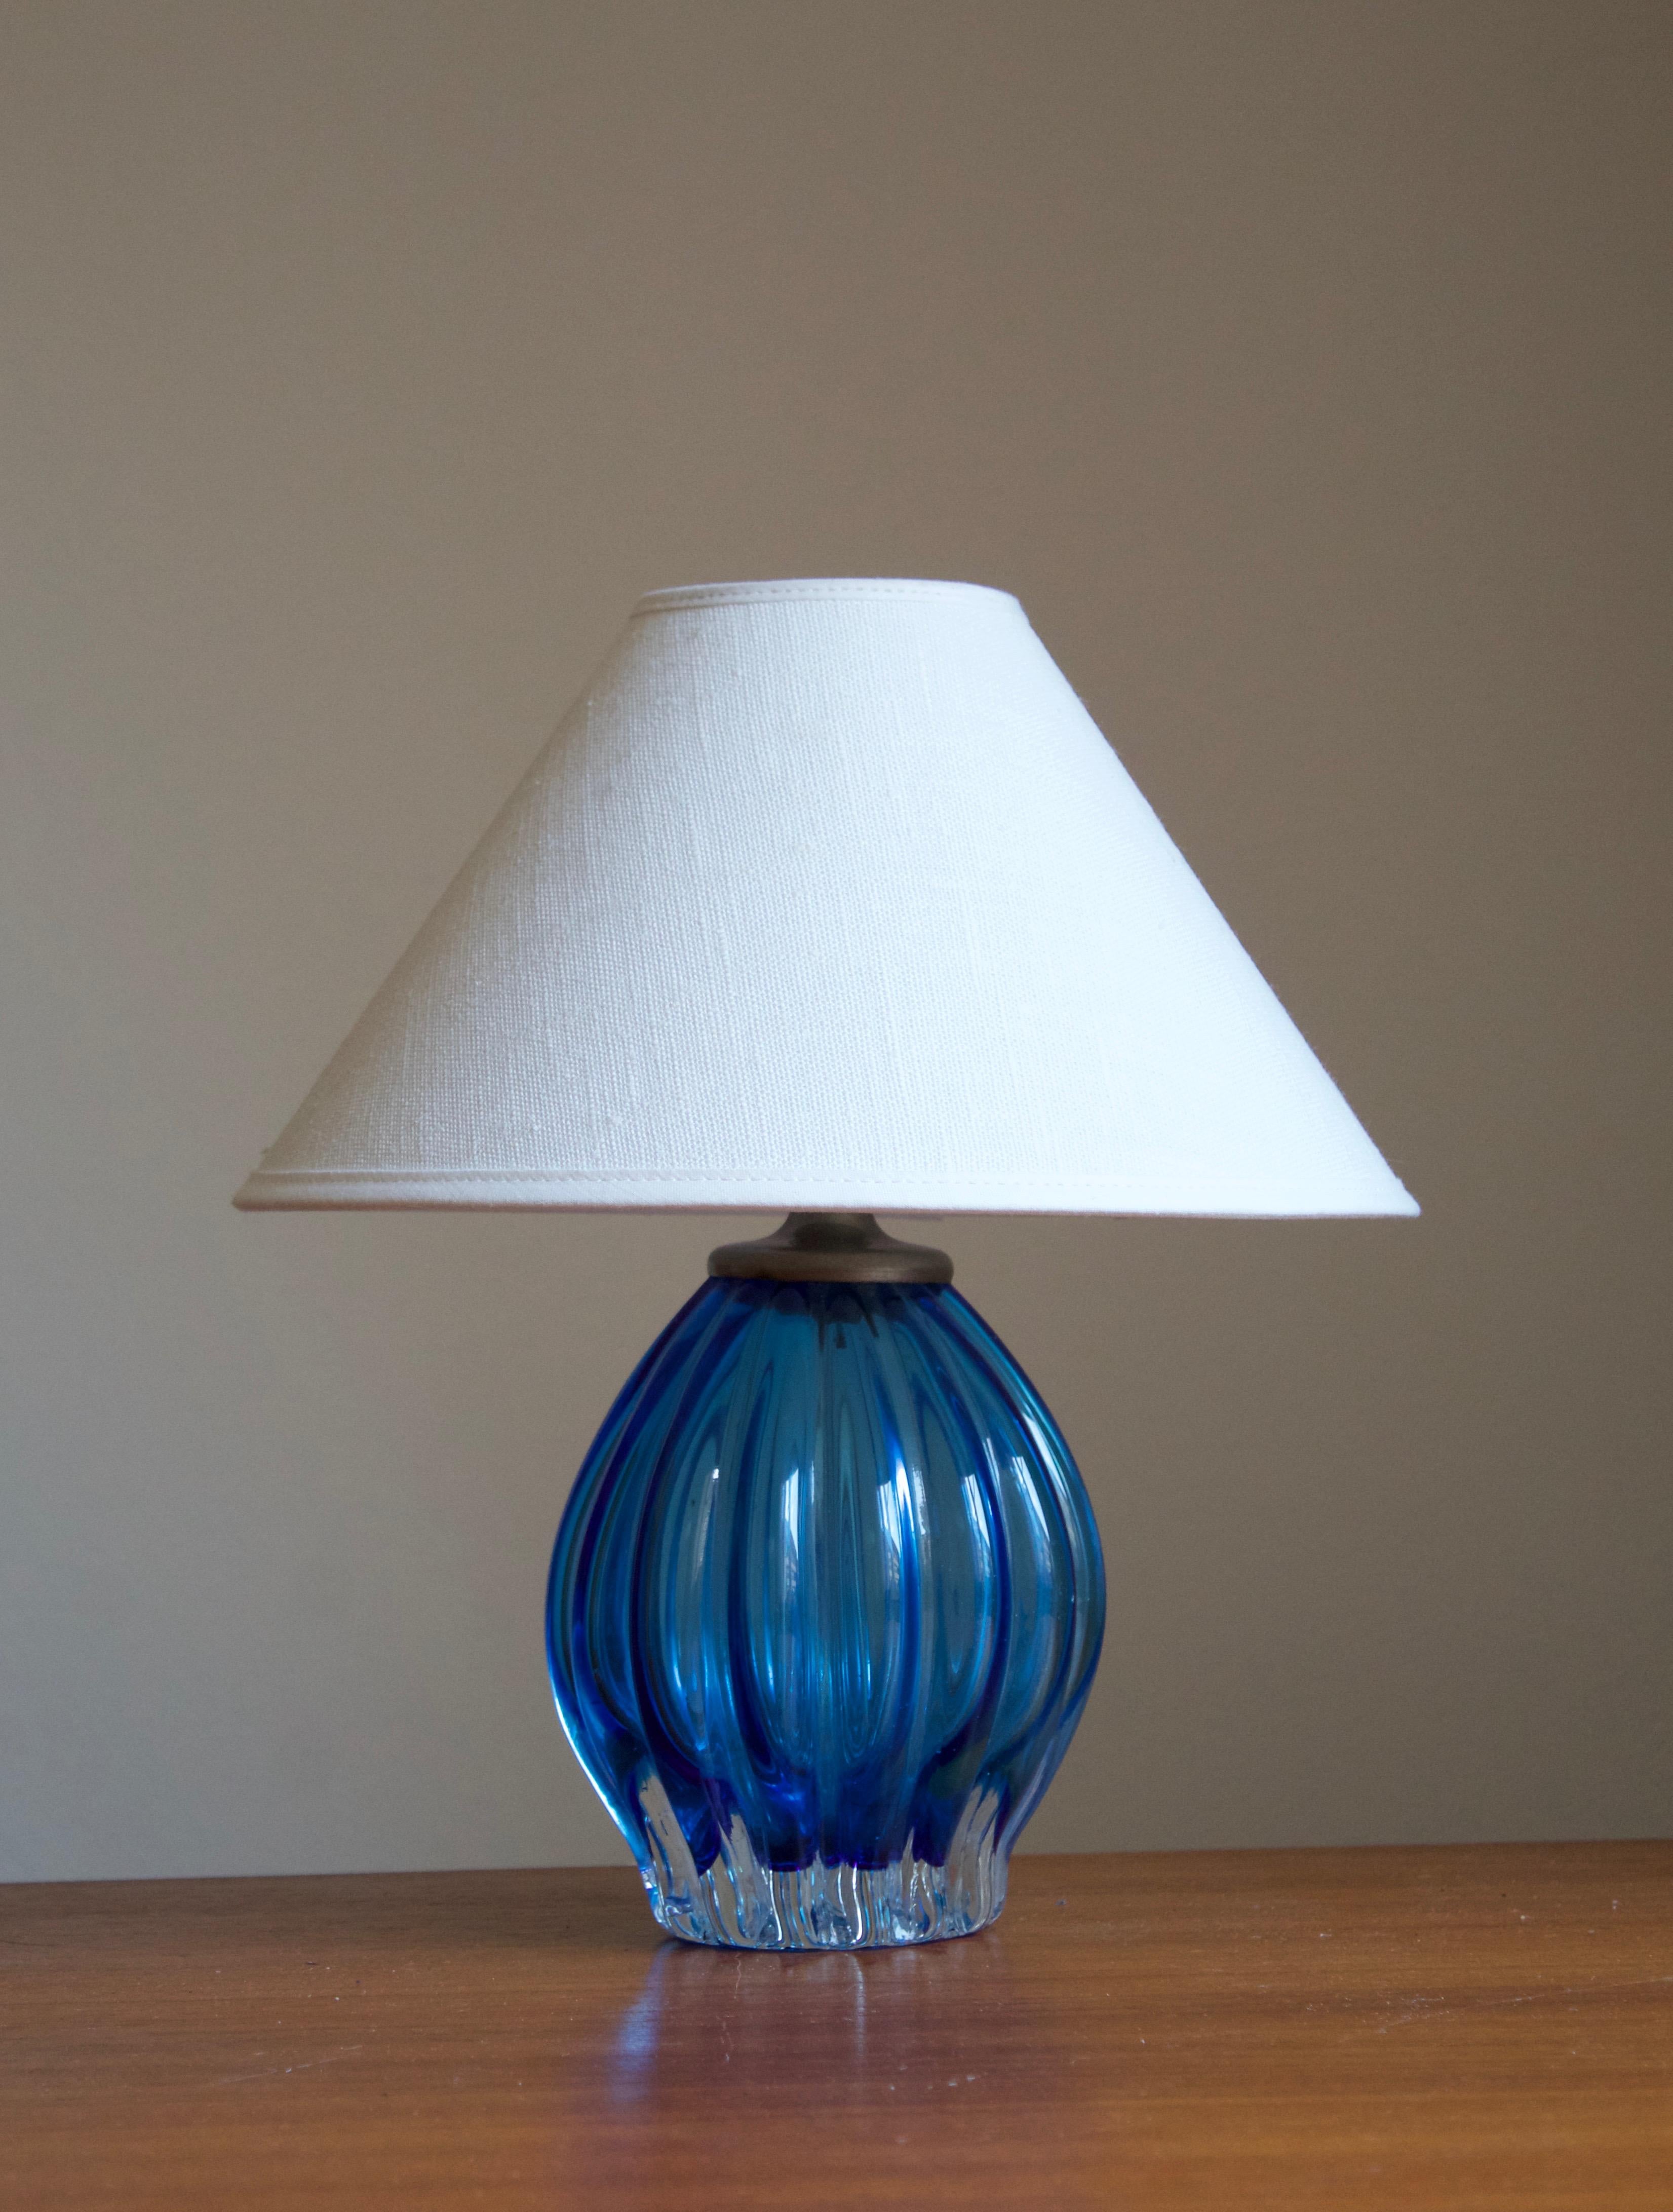 A table lamp. Designed and produced in Murano glass, Italy, 1940s.

Features colored blue glass and metal socket. 

Stated dimensions exclude lampshade. Height includes socket. Sold without lampshade.